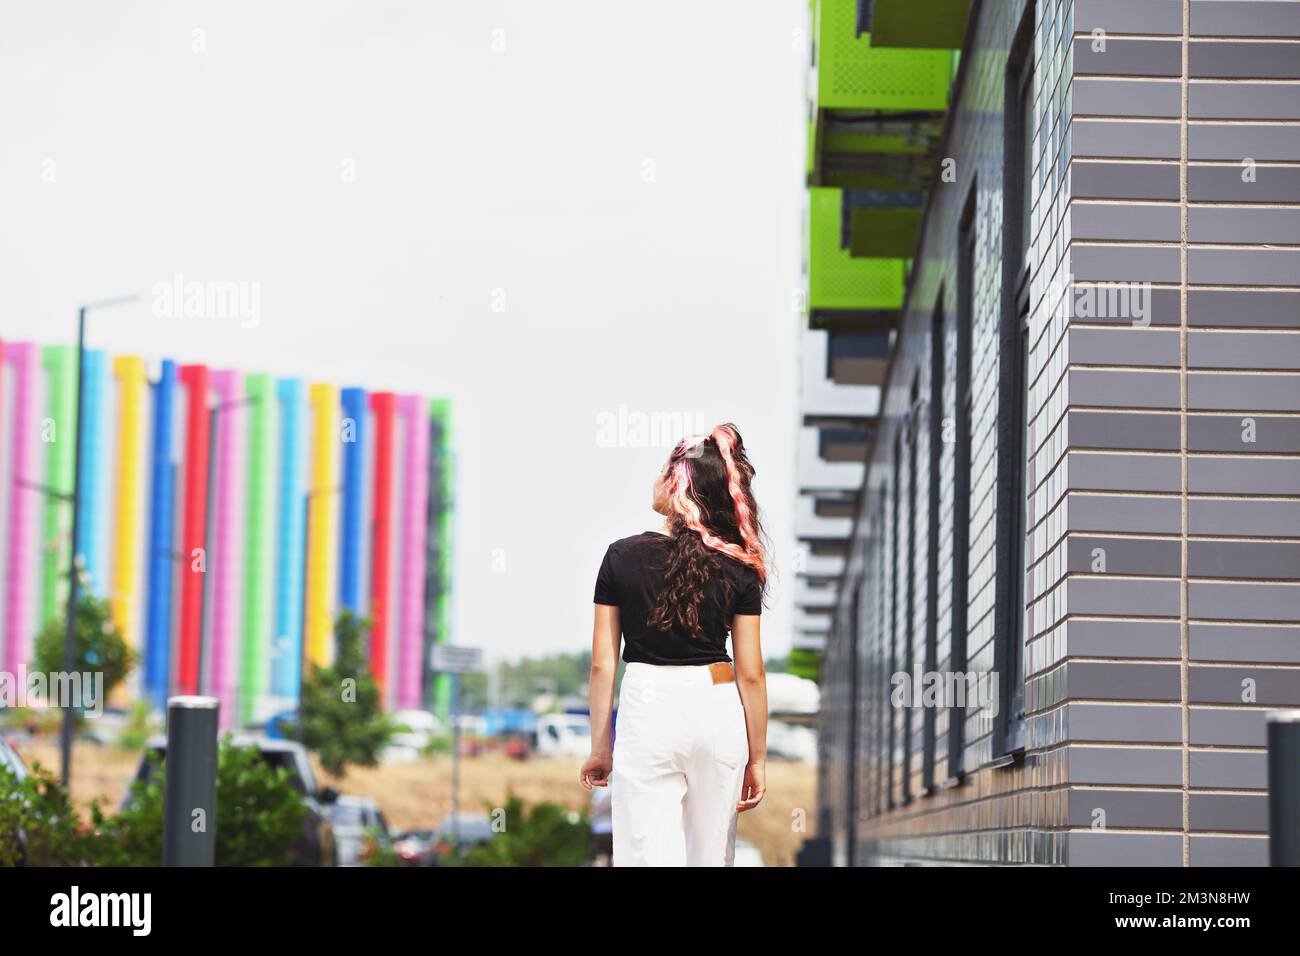 Back of unrecognizable girl with long hair dyed pink, walking along city street, against background of rainbow building Stock Photo